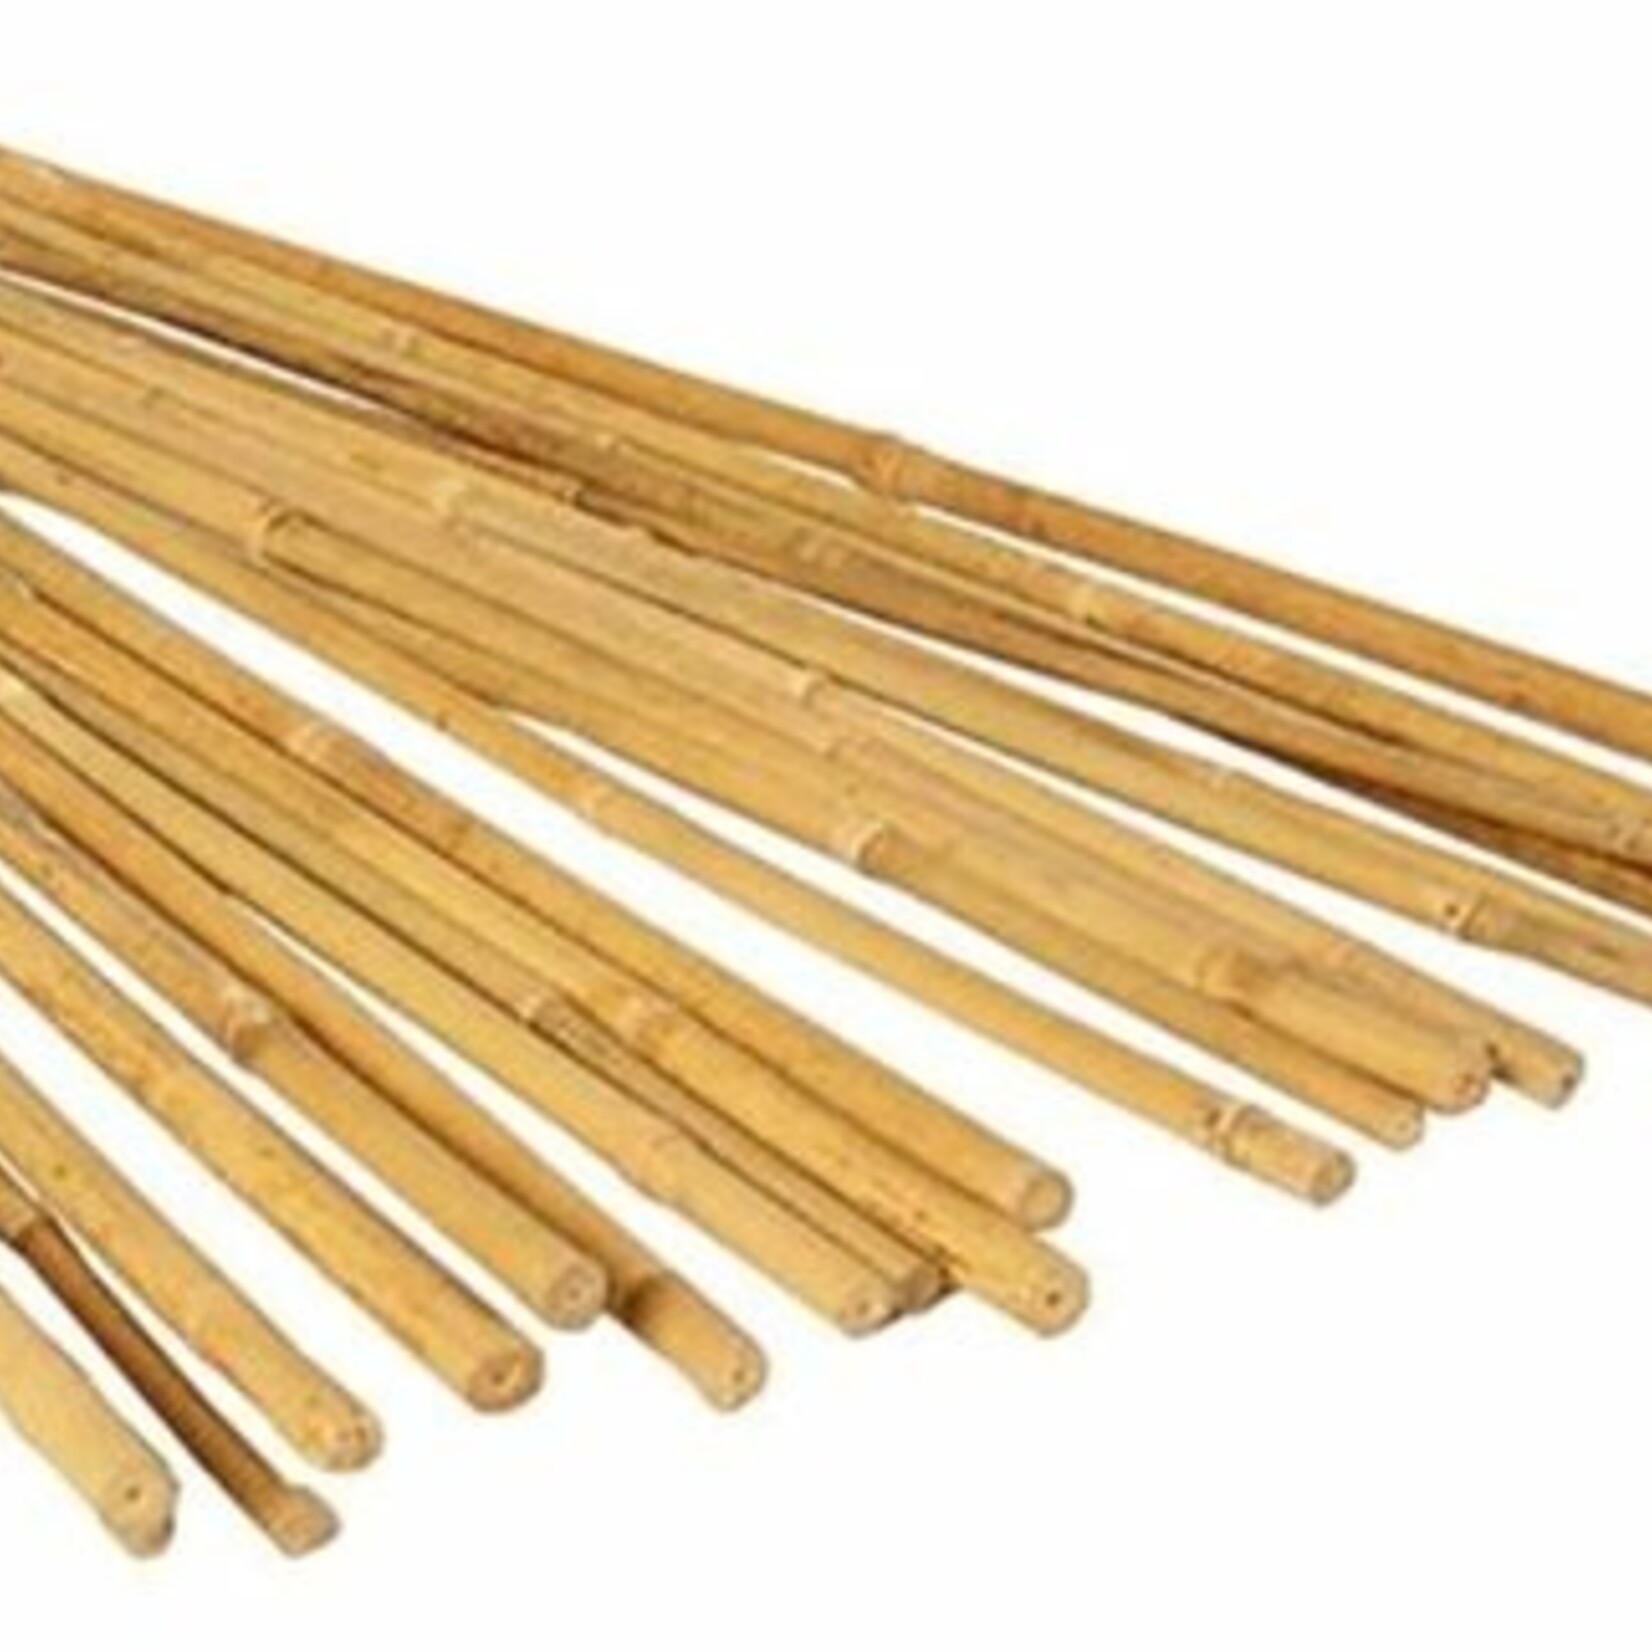 3' Bamboo Stake, pack of 25